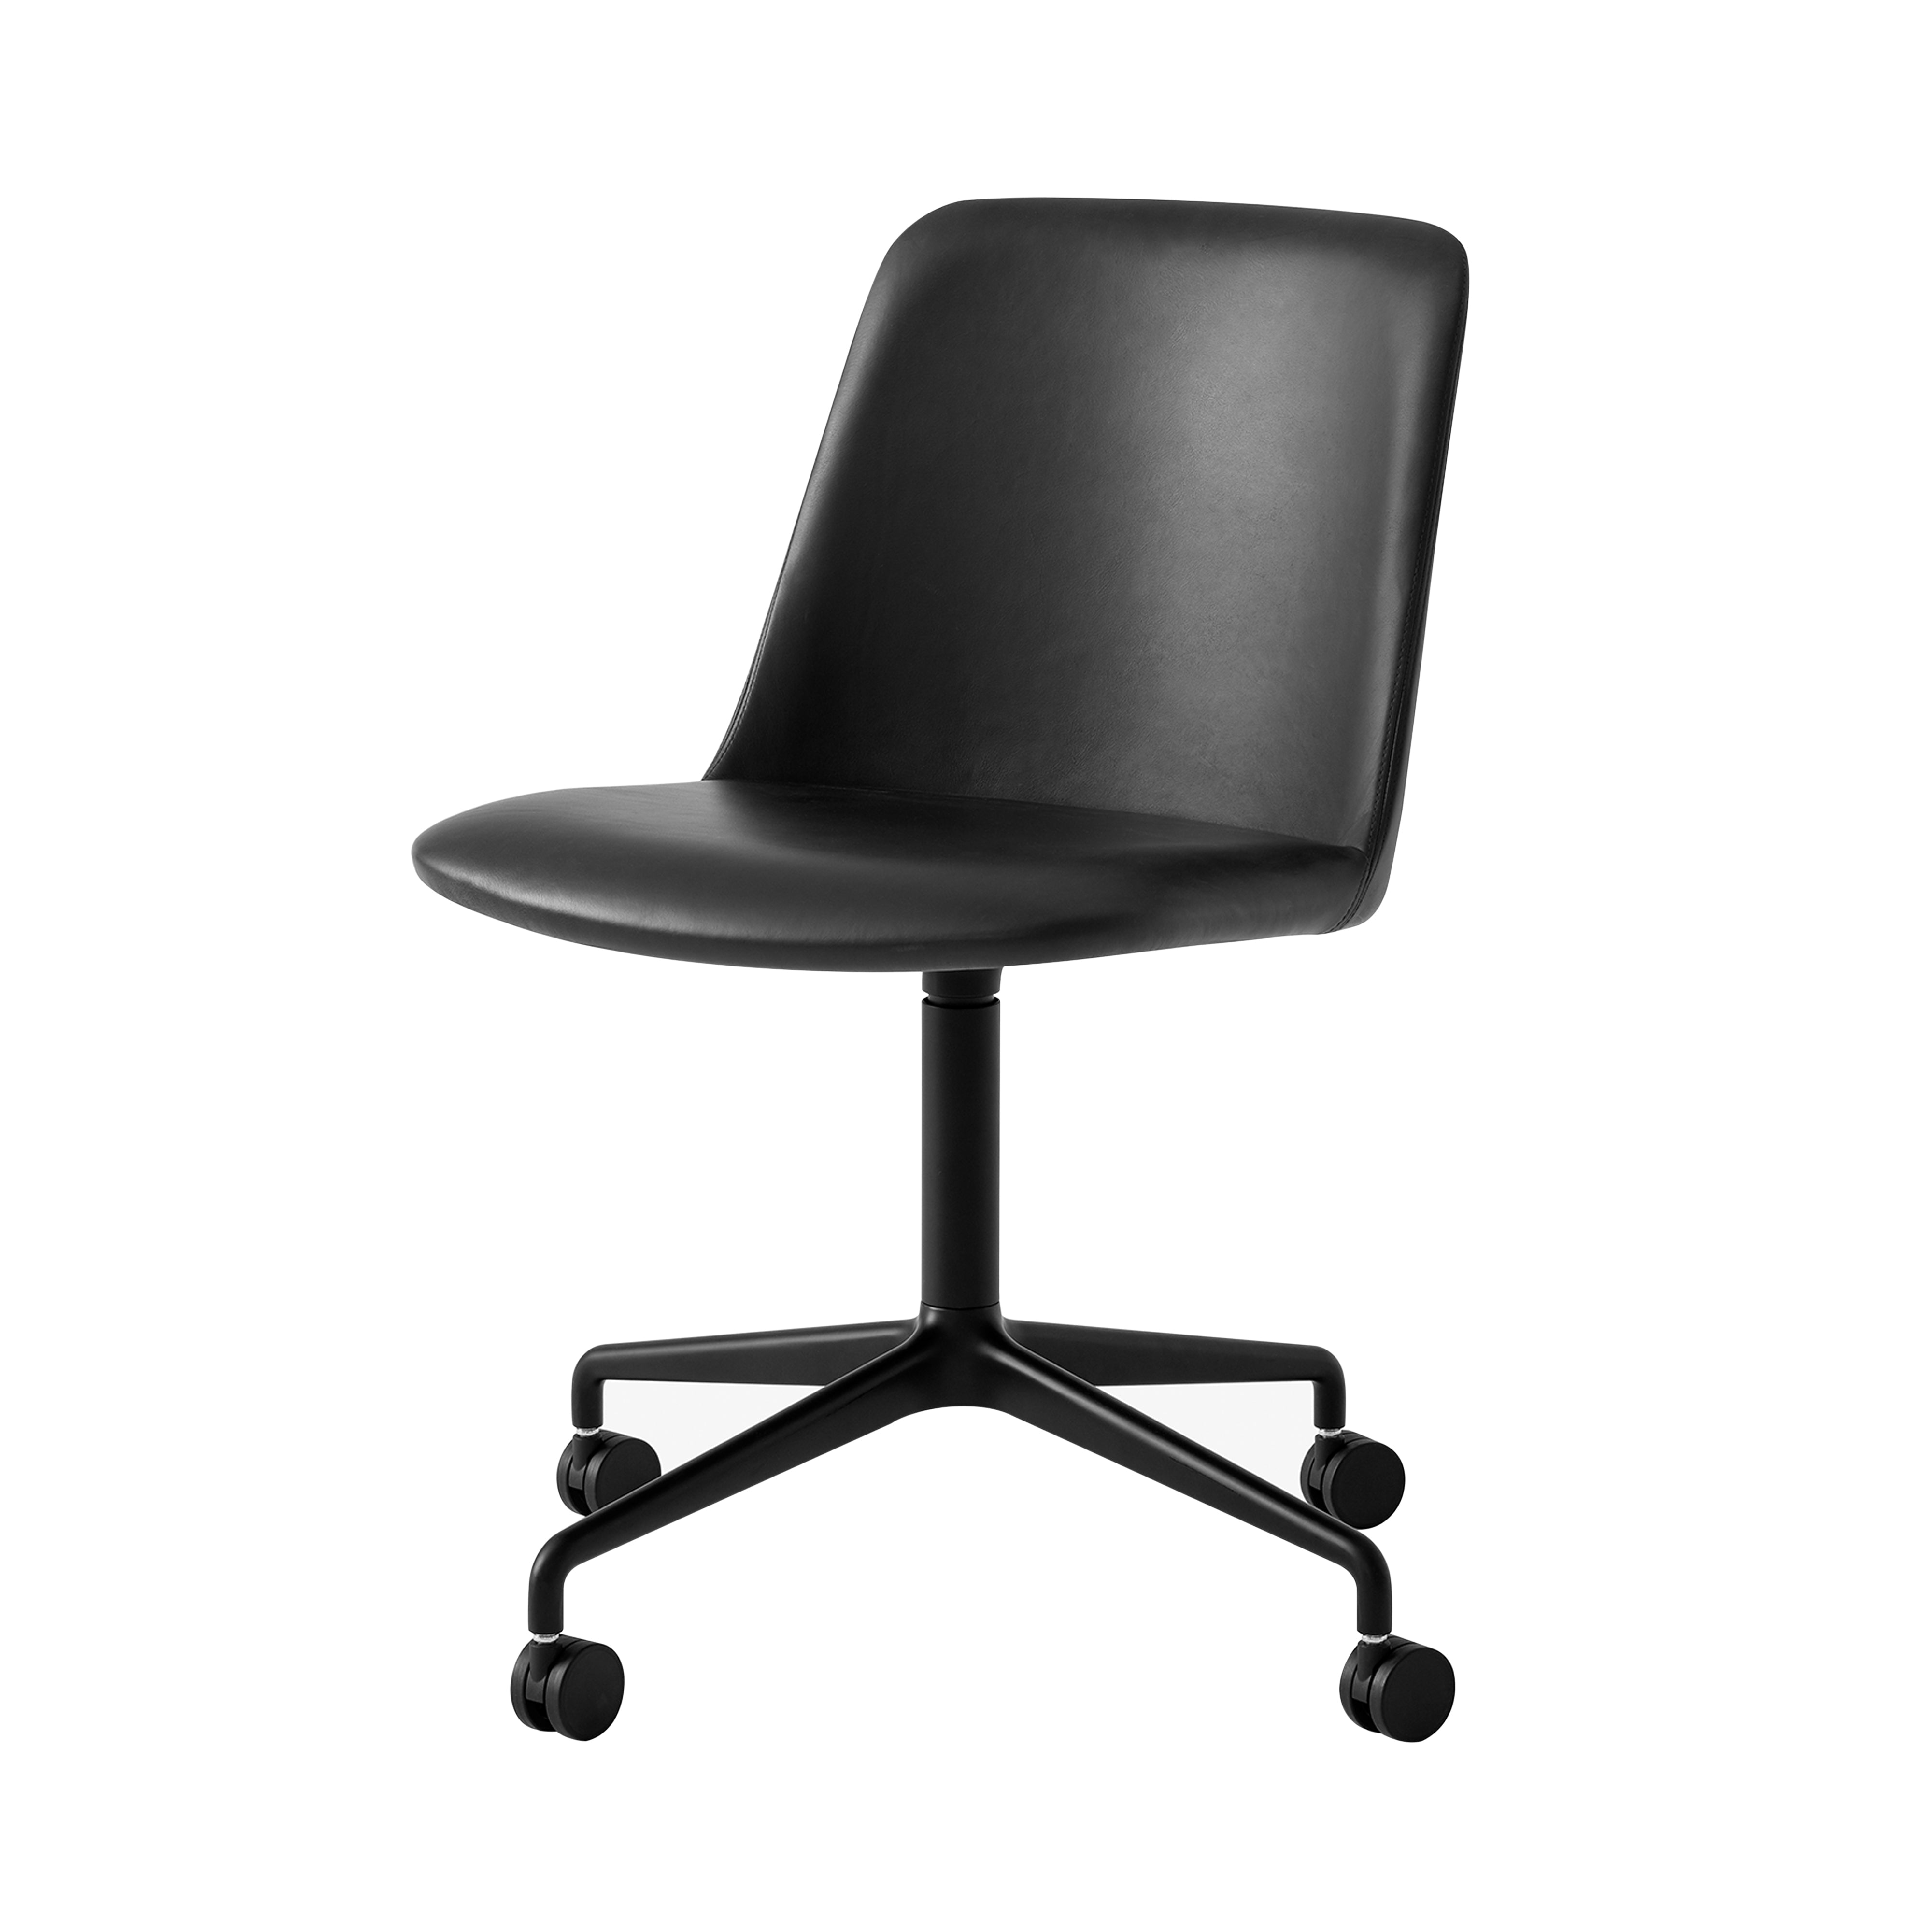 Rely Chair HW23: Black